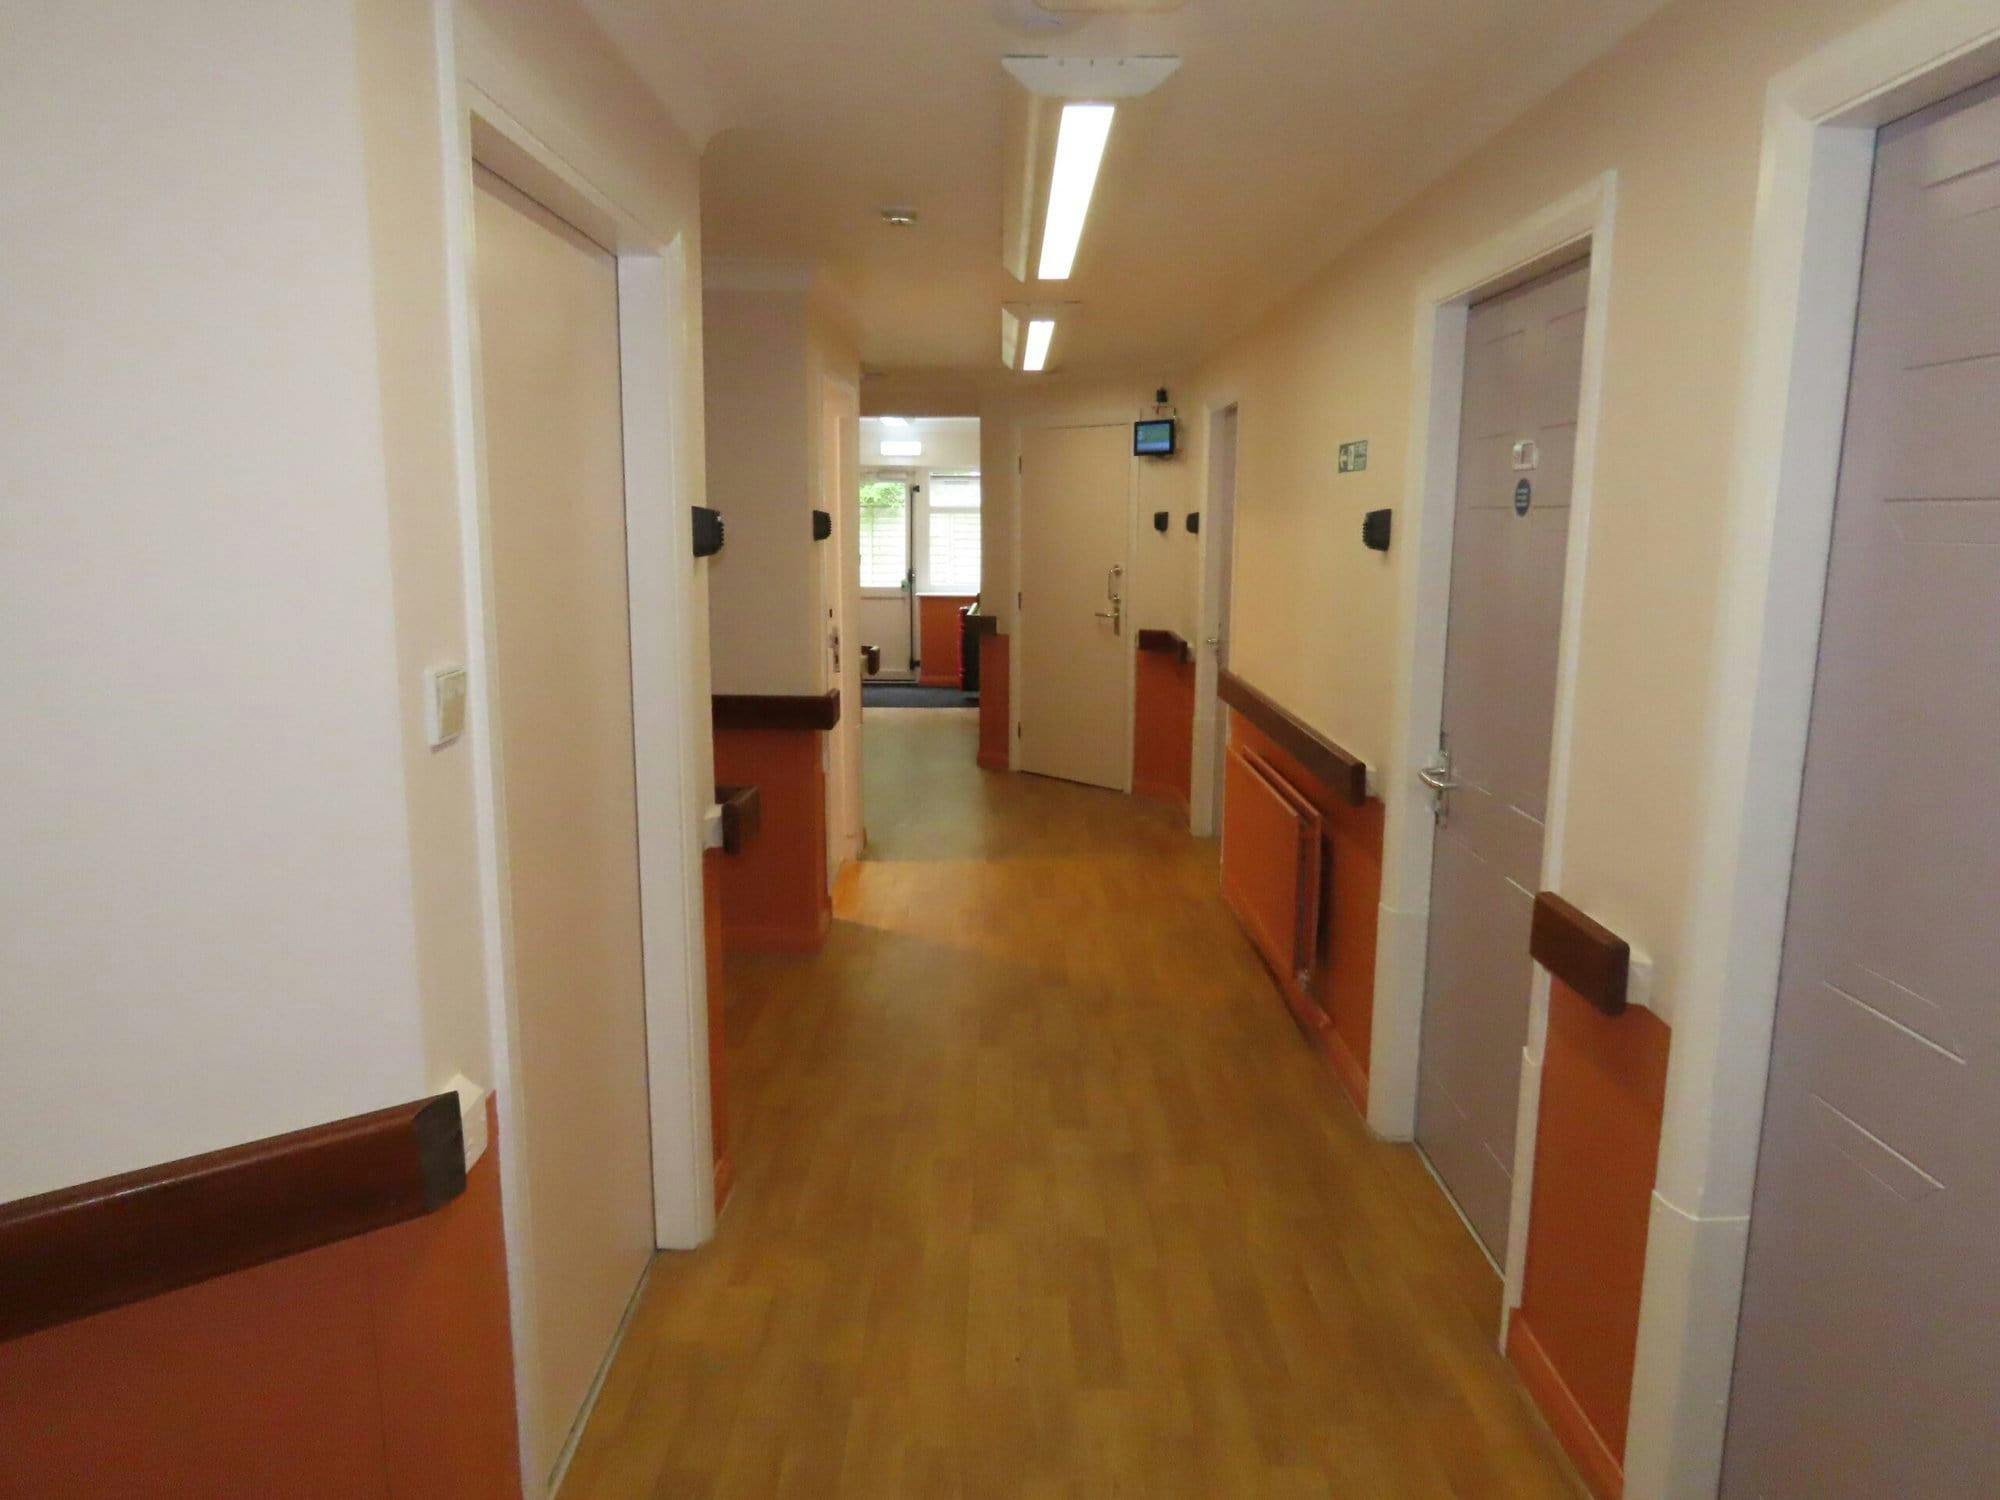 Hallway at Knowles Court Care Home, Bradford, West Yorkshire